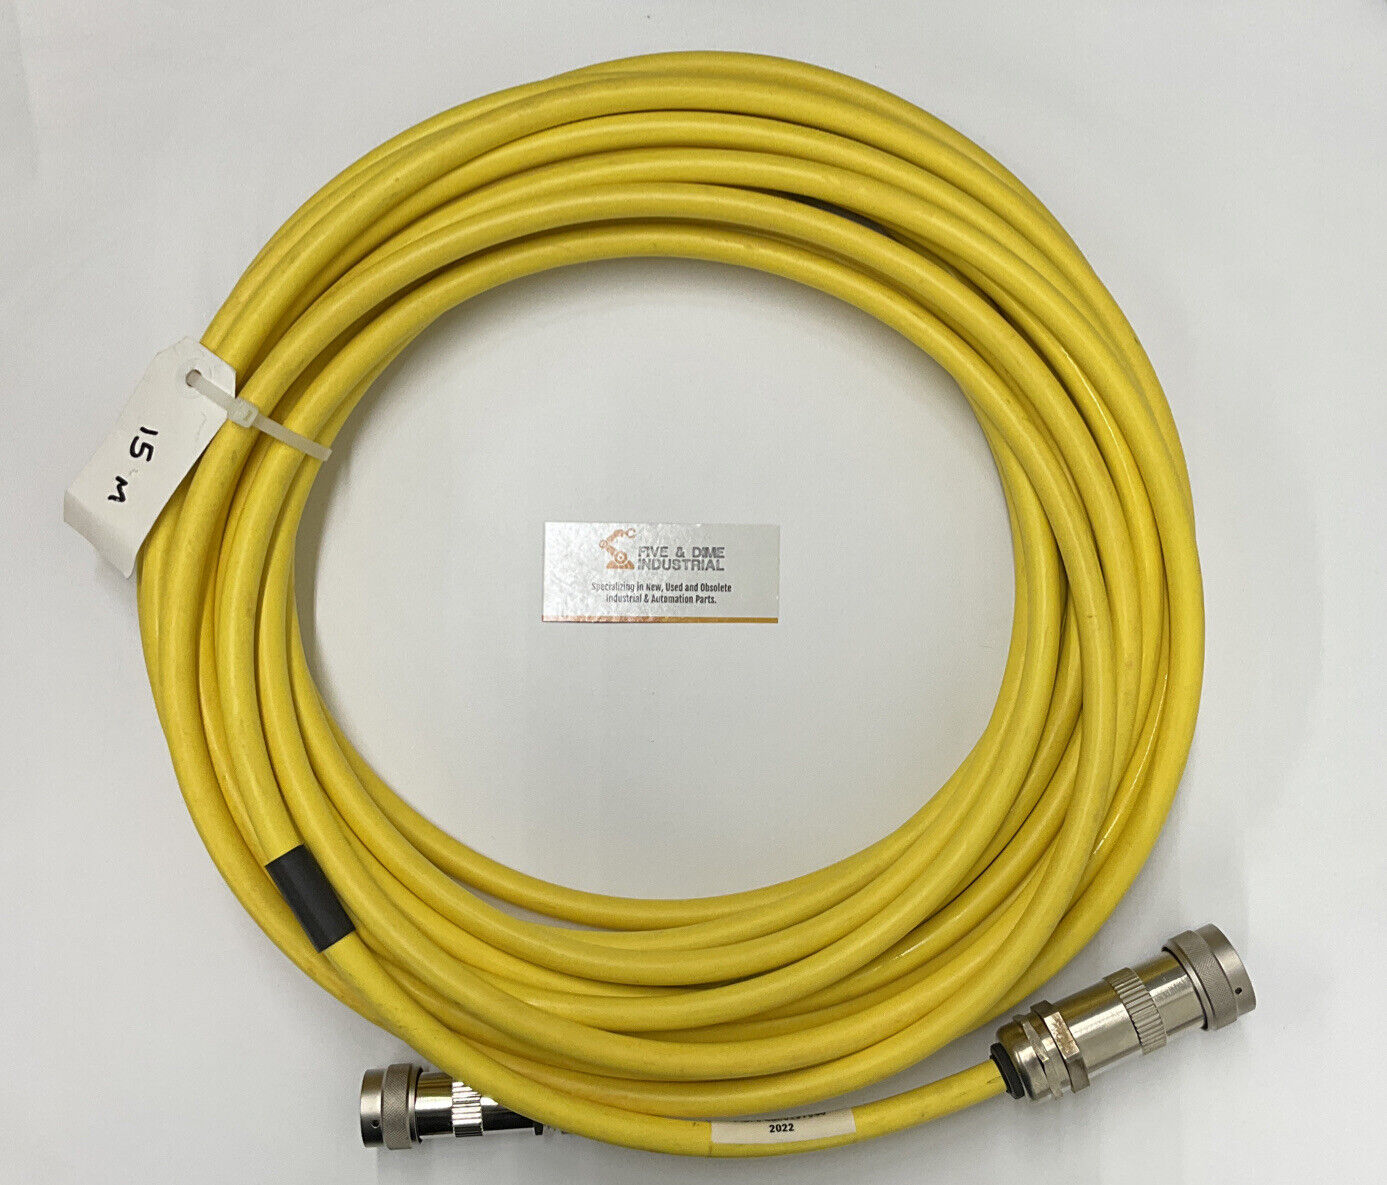 ABB 3 HAC029332 P-15M Control Power Cable 15 Meters (CBL140)